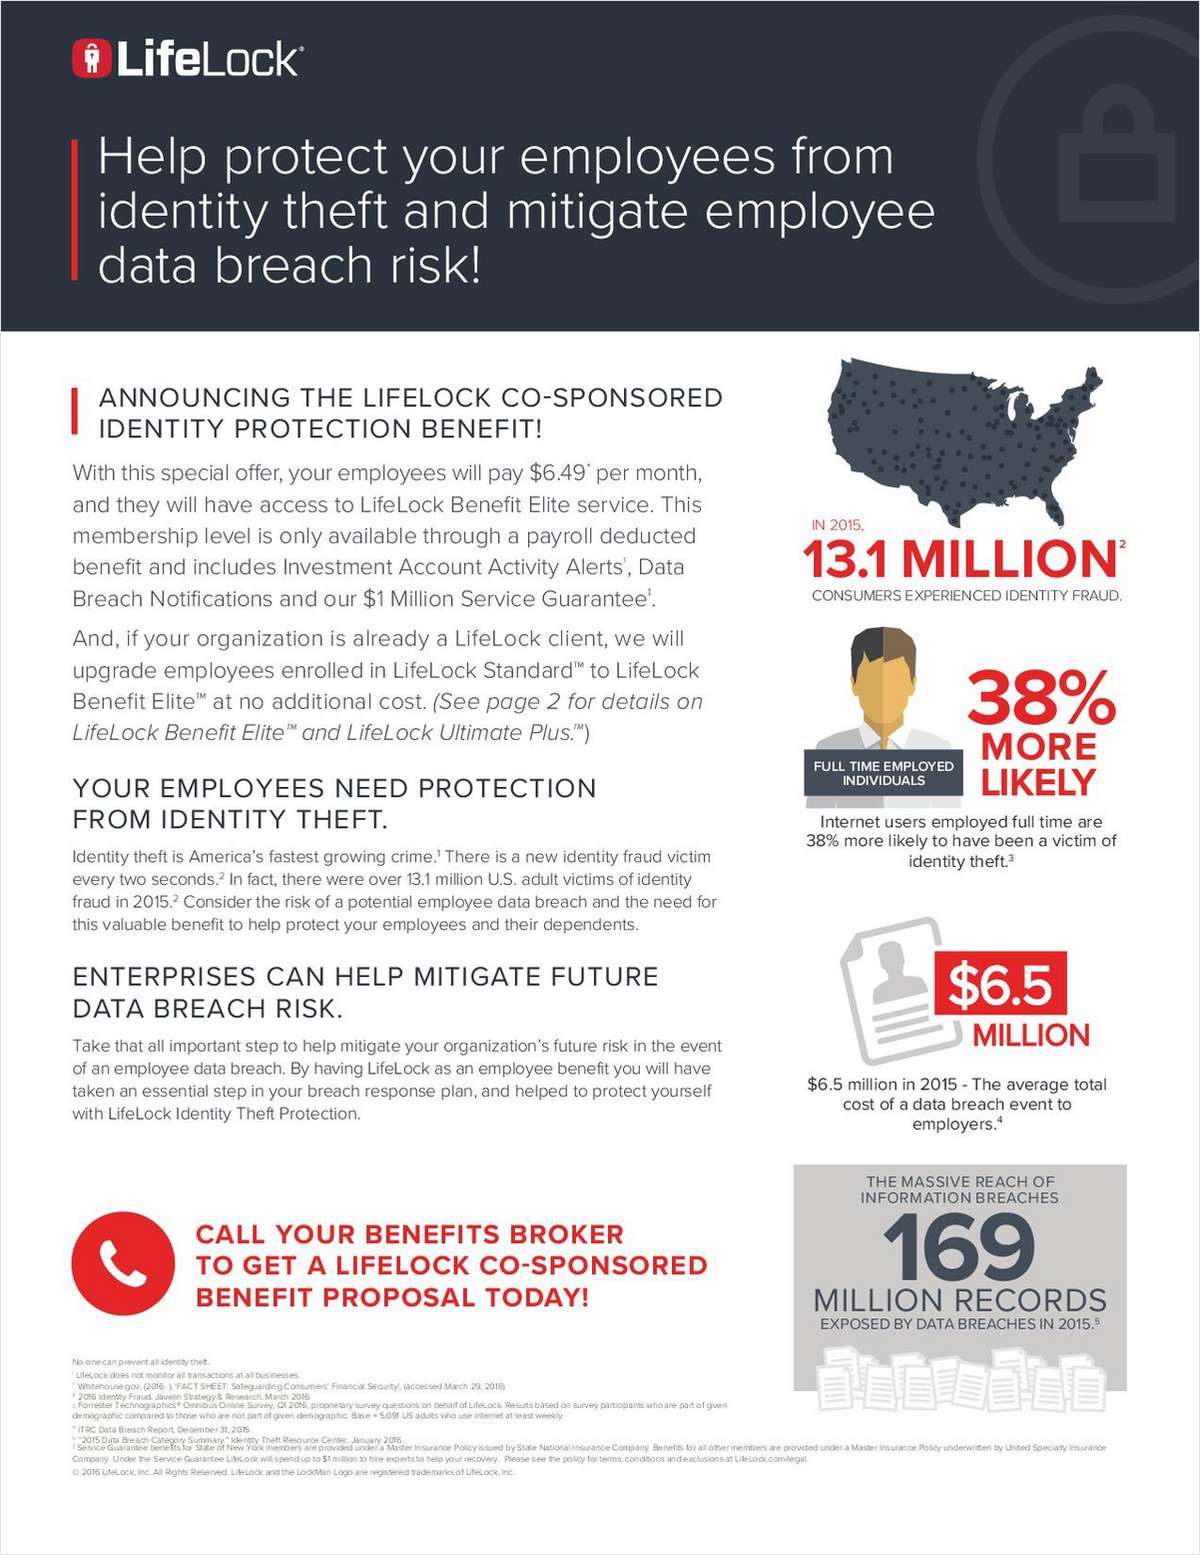 Help Protect Your Employees From Identity Theft and Mitigate Employee Data Breach Risk